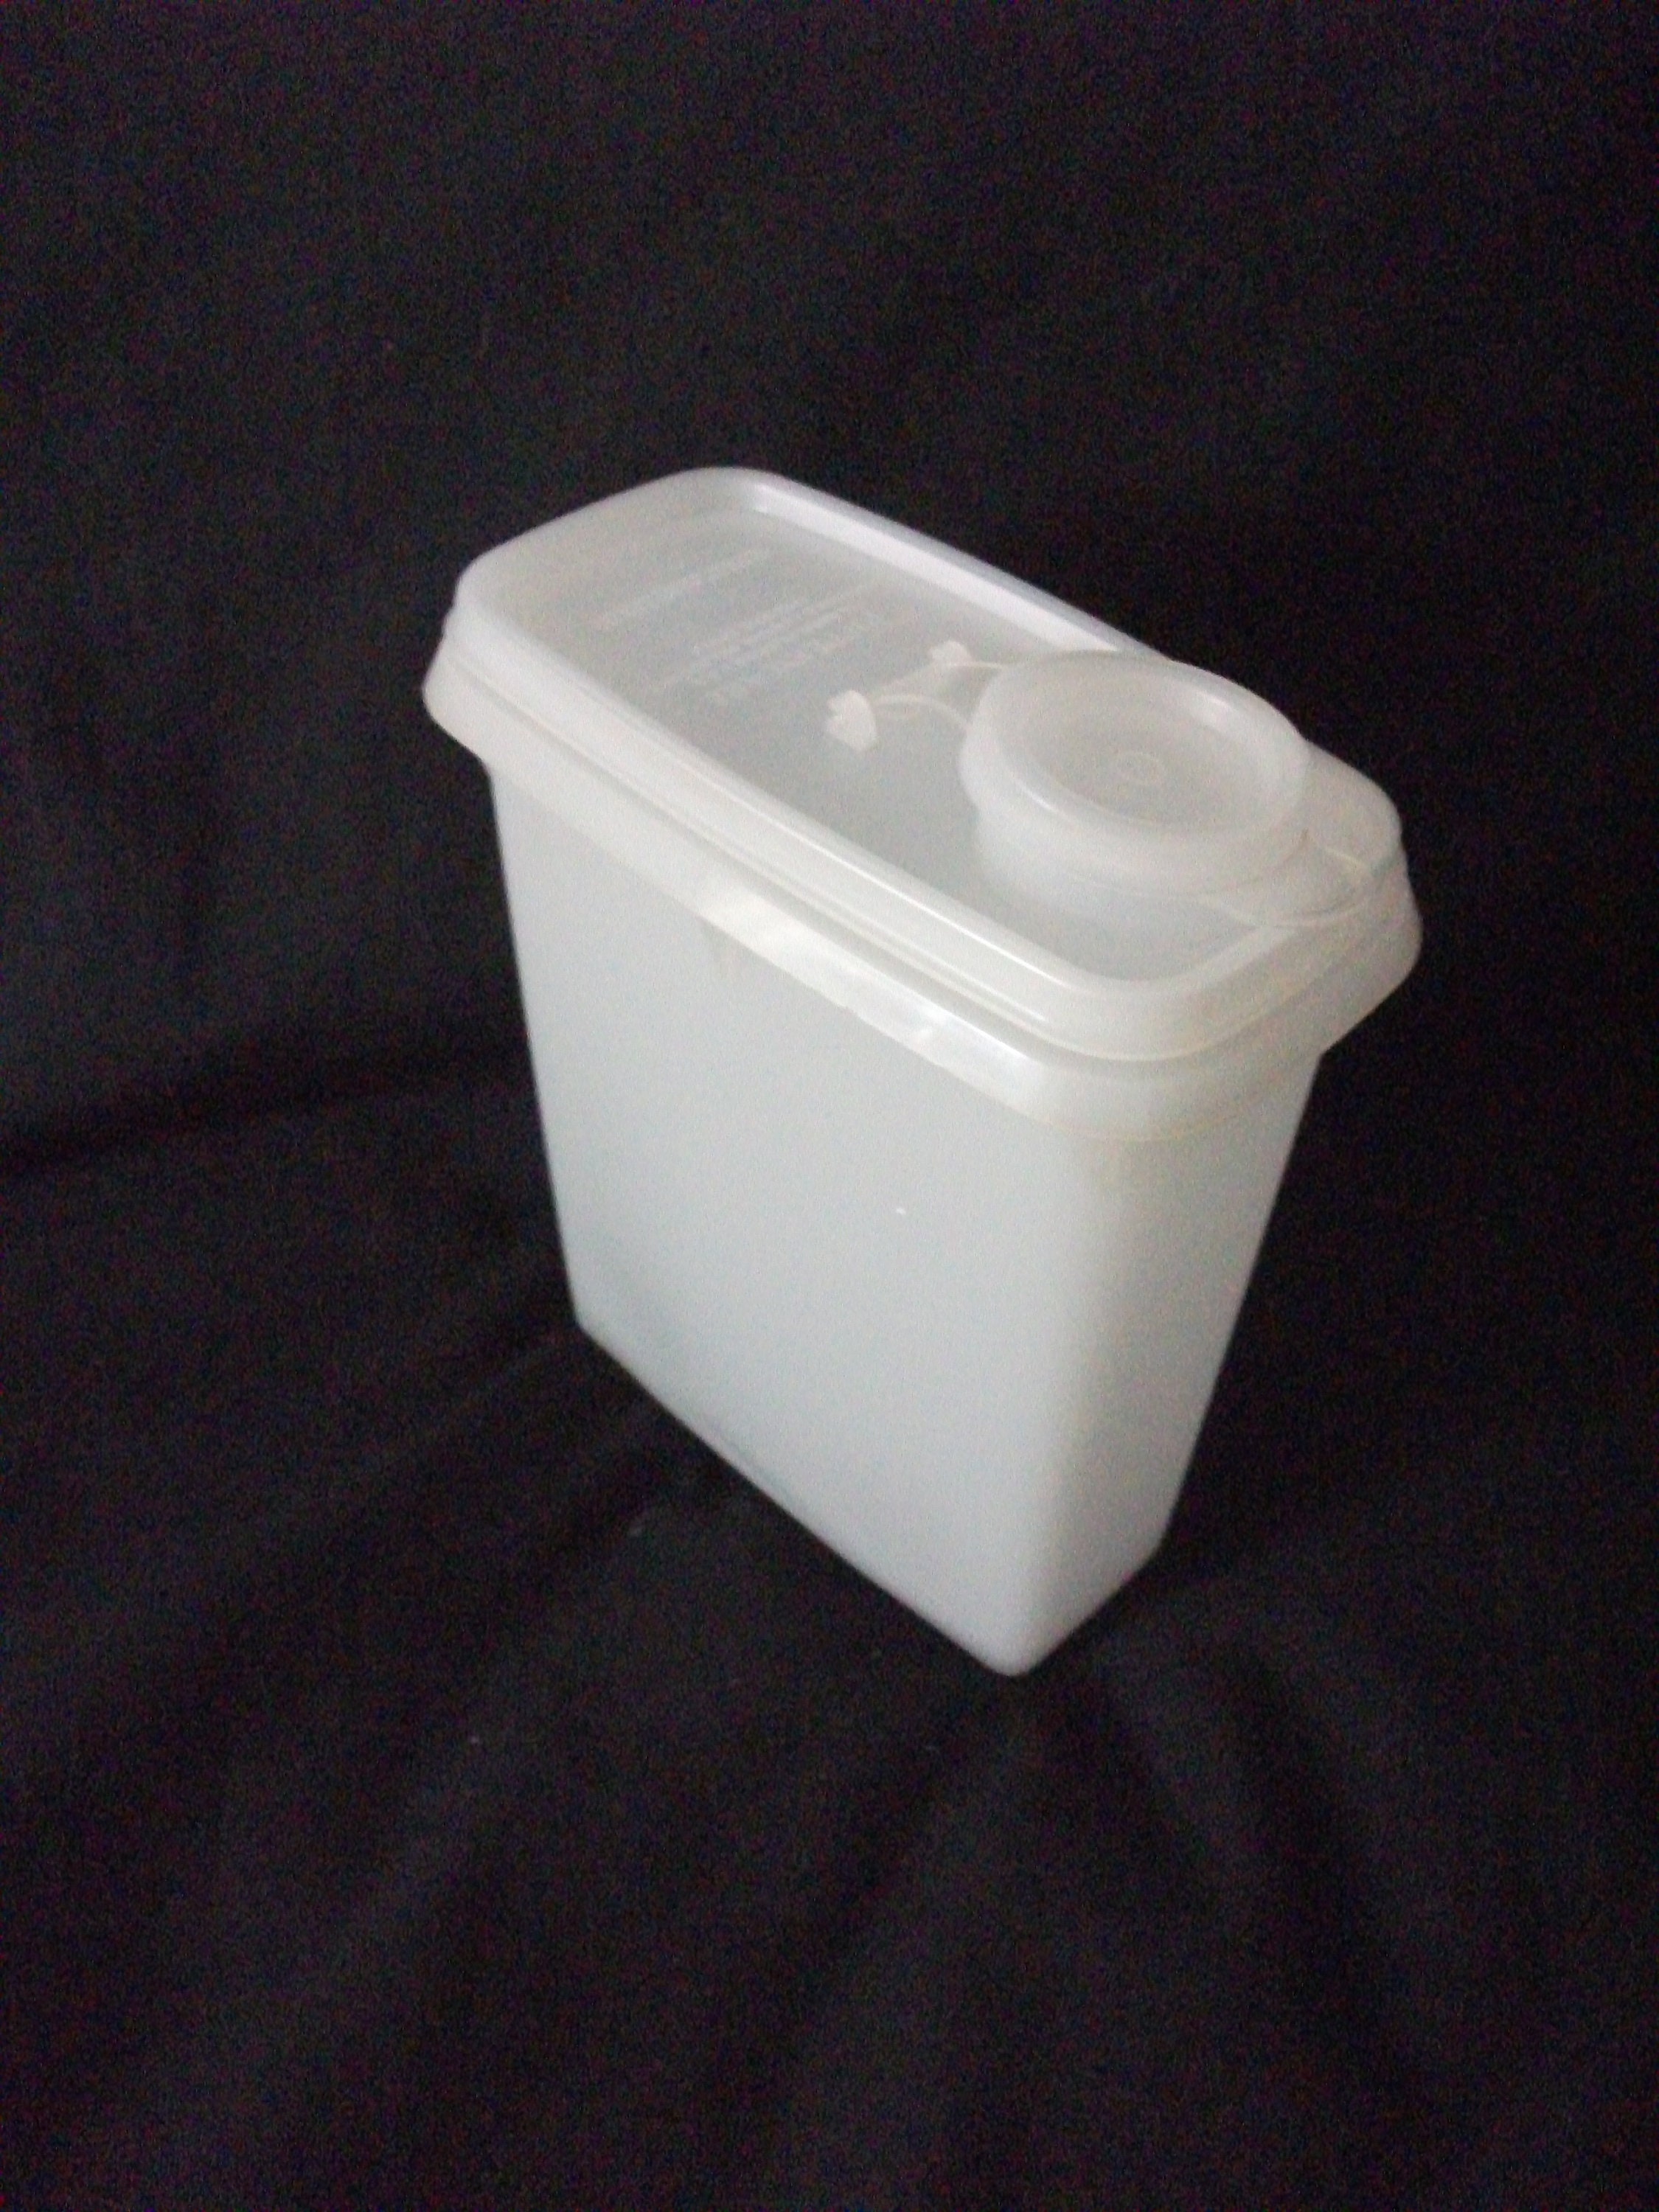 Black Tupperware Cereal Container With Lid 